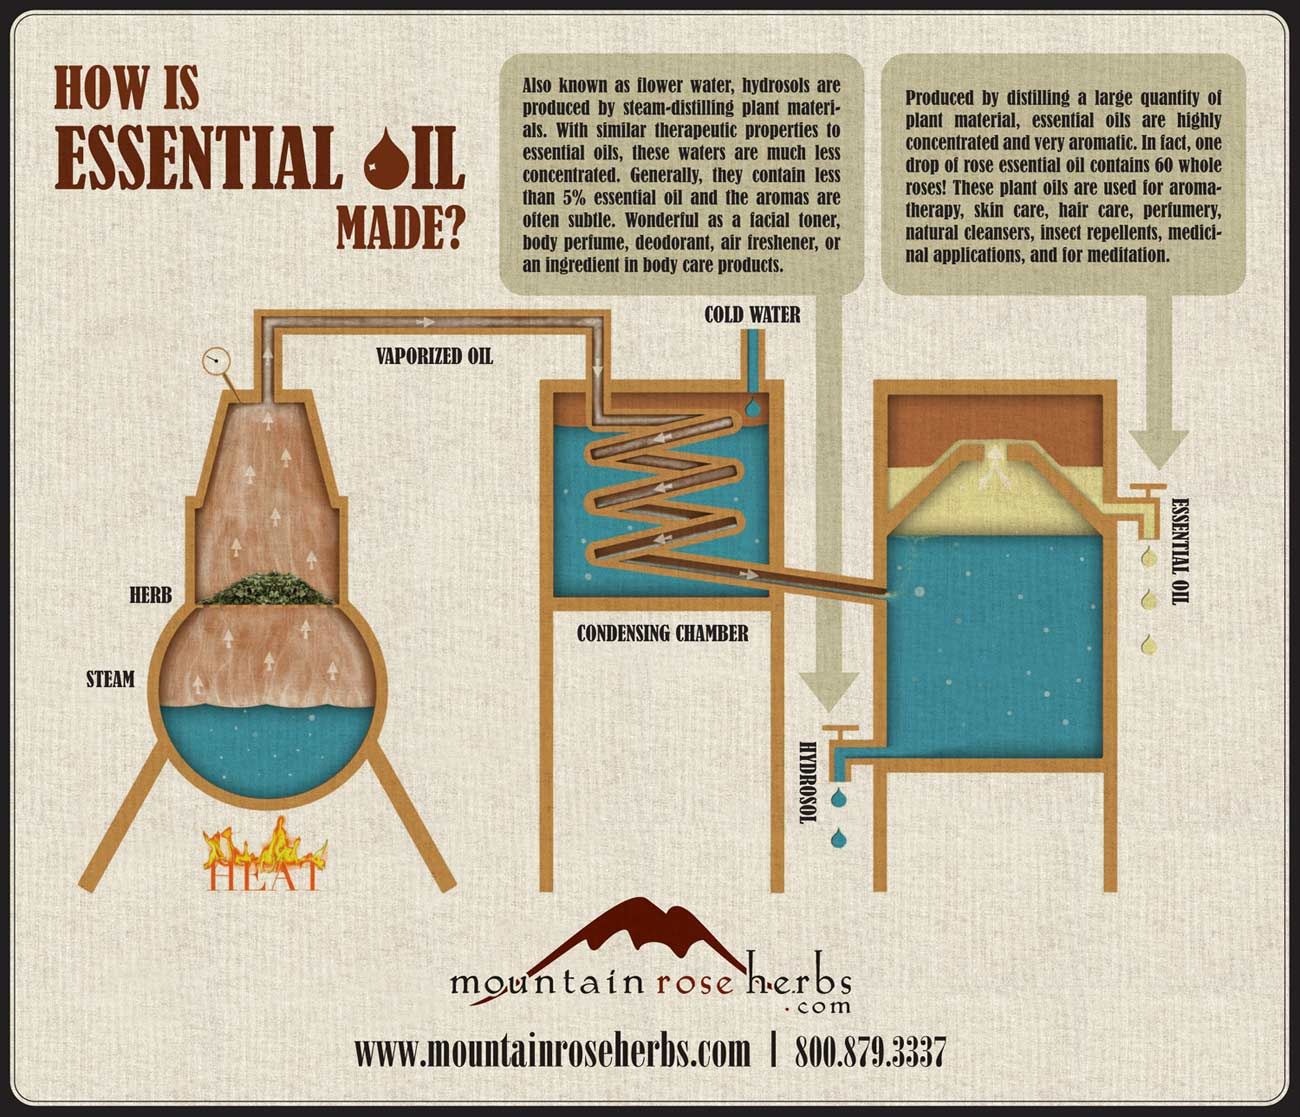 How is Essential Oil Made?